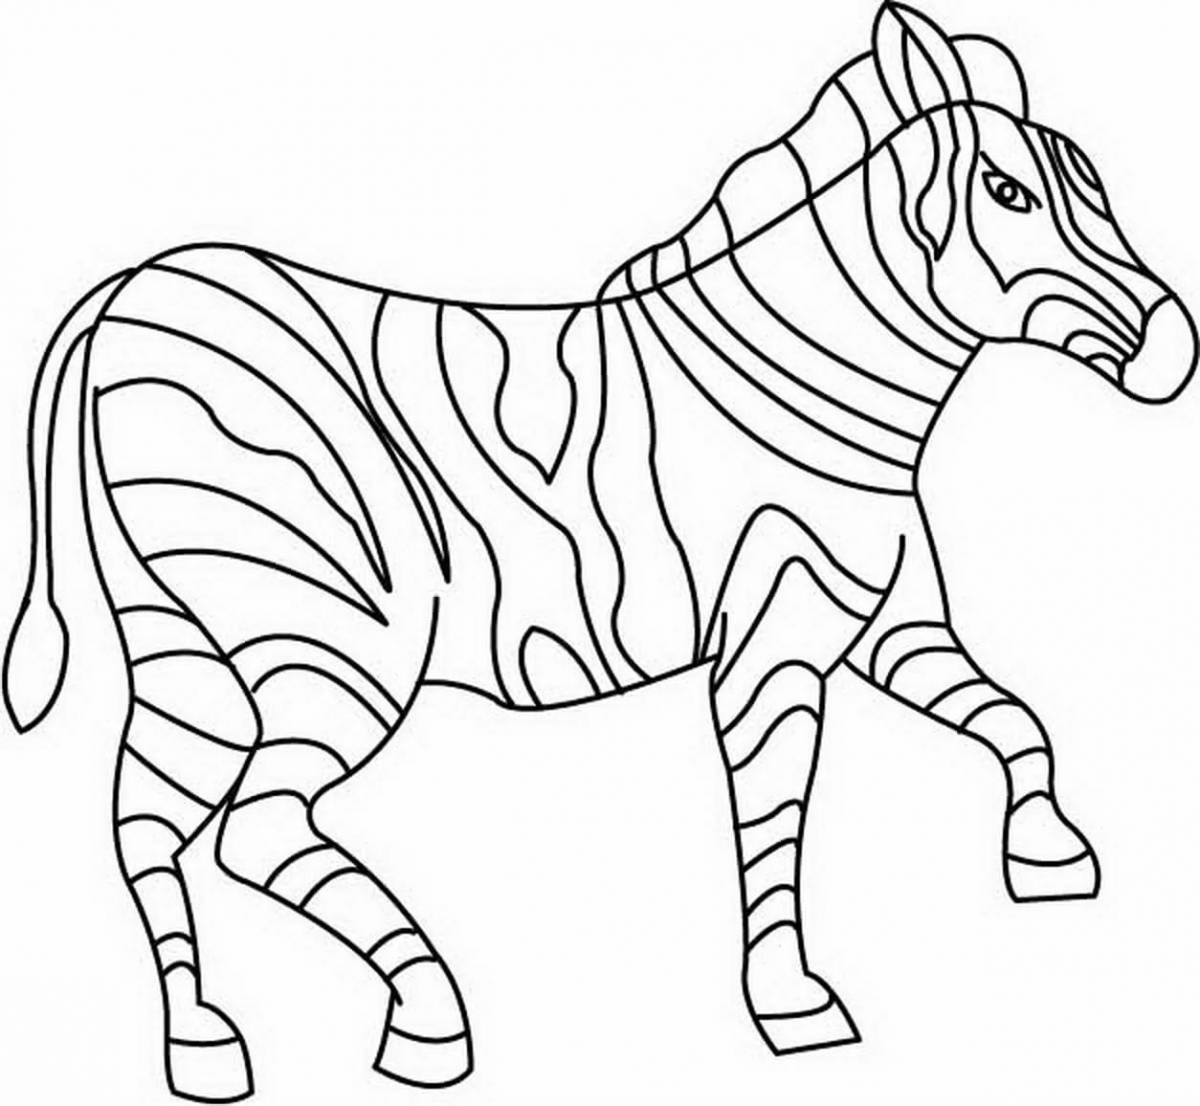 Impressive hot country animals coloring book for preschoolers